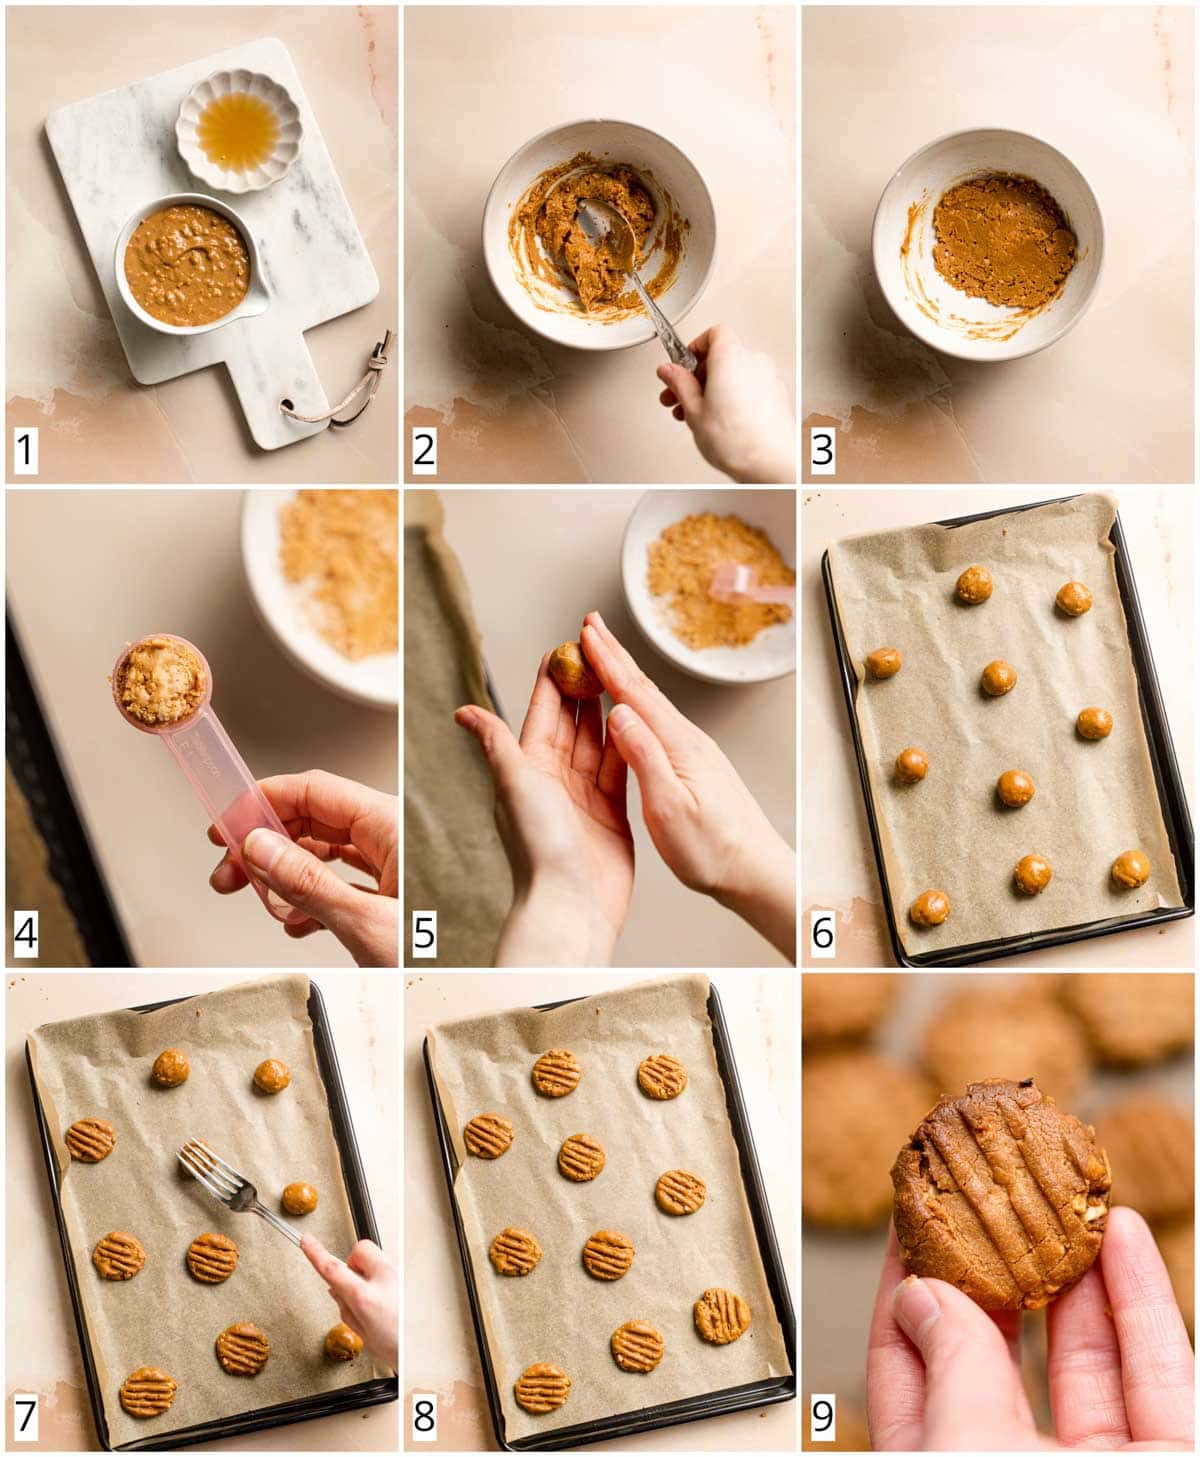 A collage of 9 images showing the process of making peanut butter cookies.